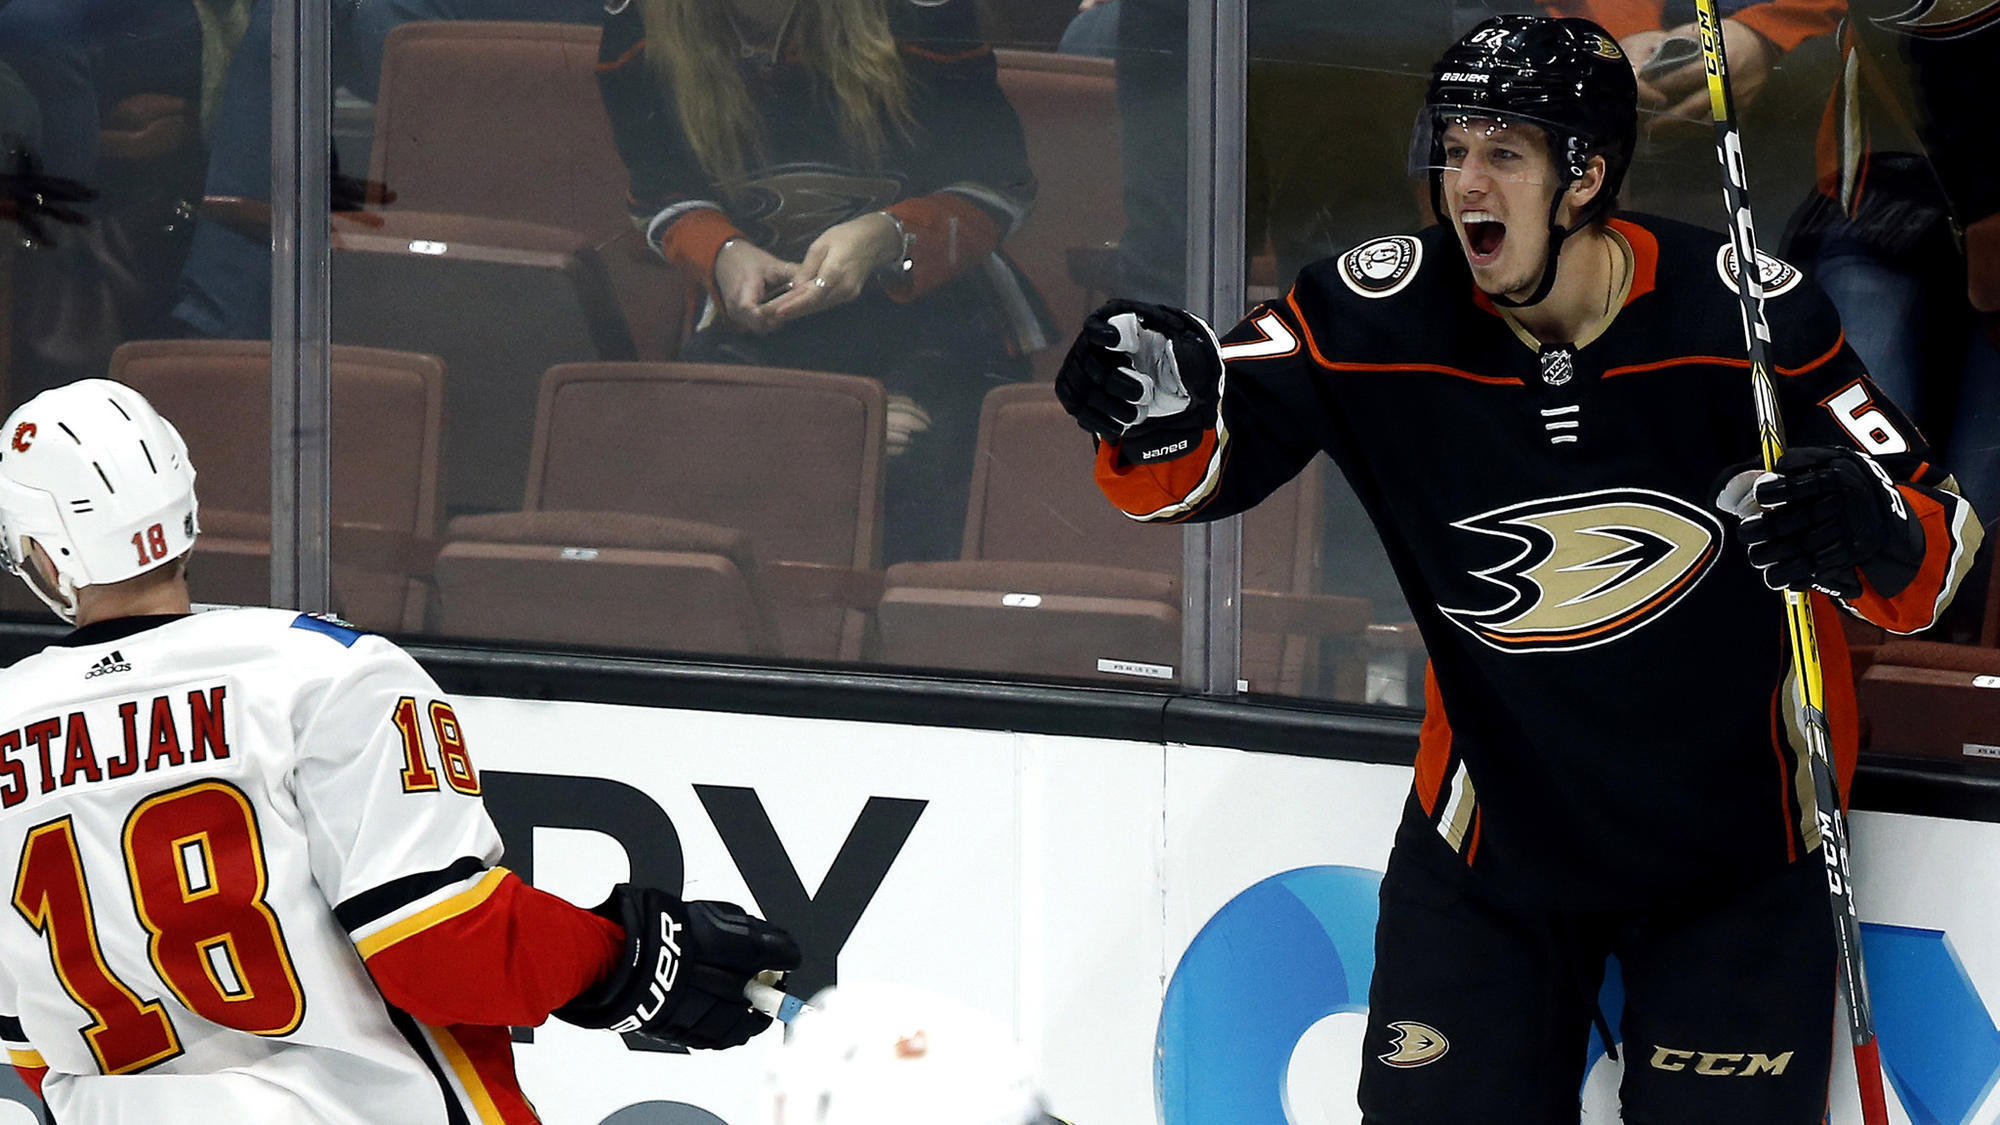 Rickard Rakell stays hot and helps the Ducks defeat the Flames